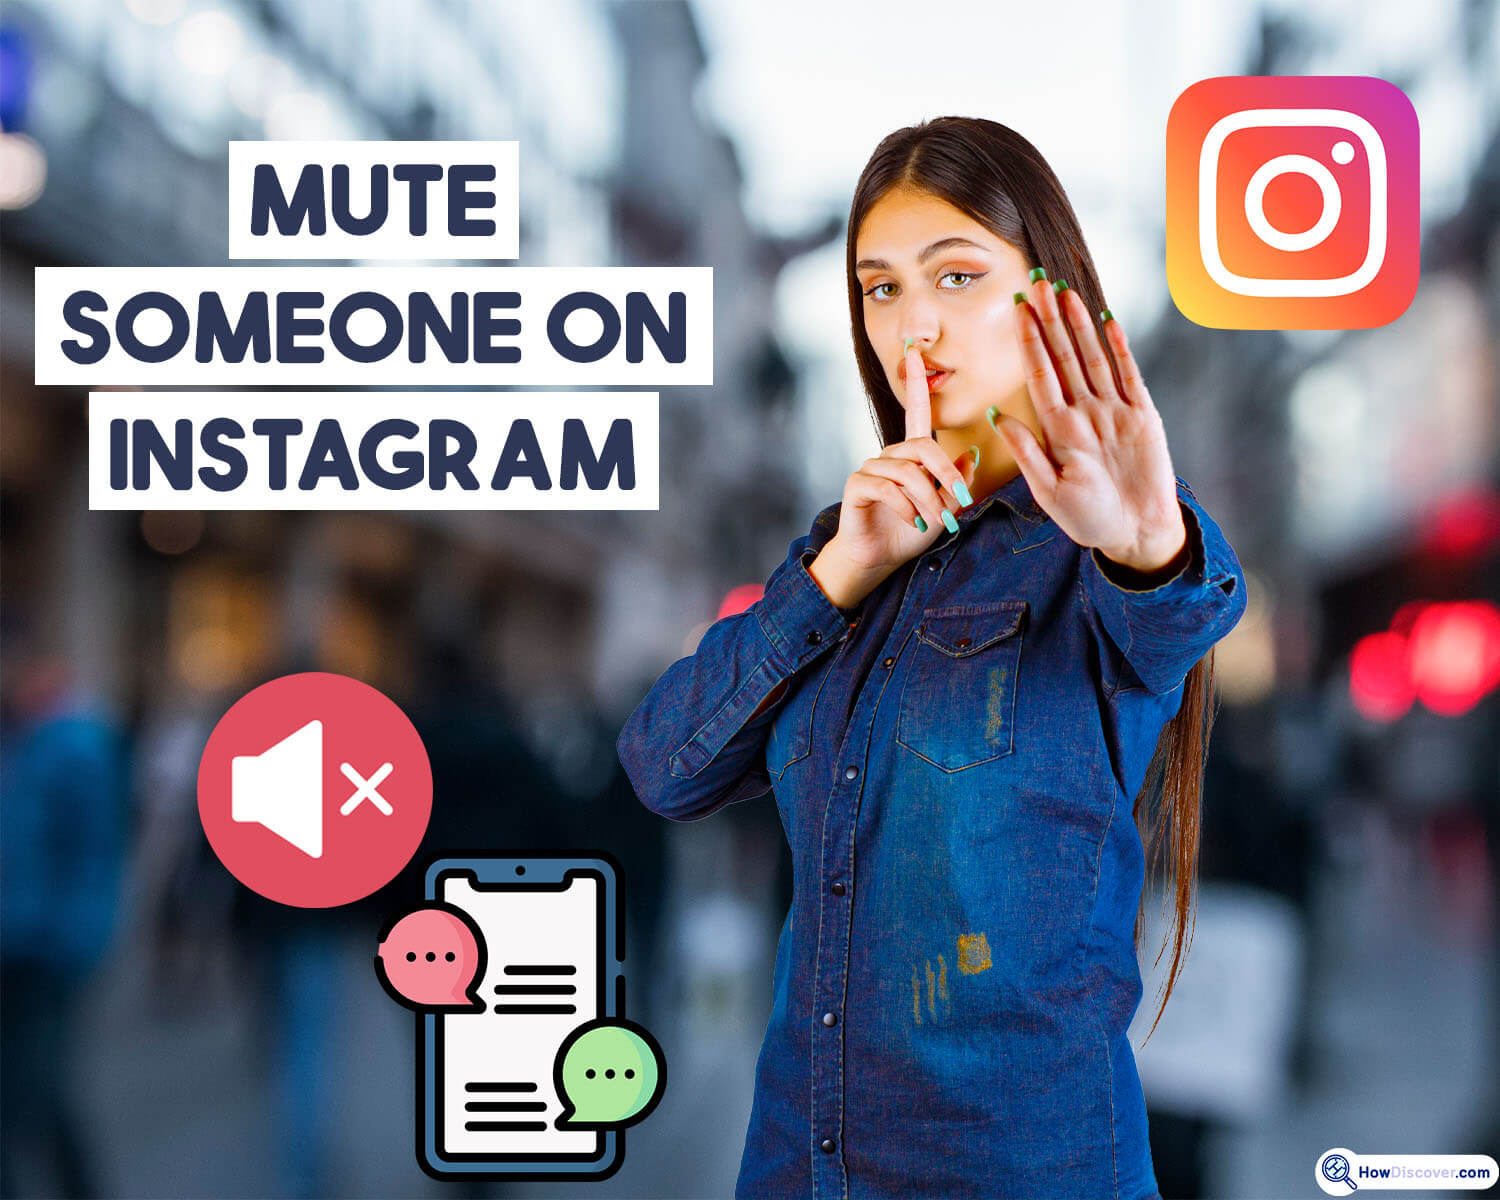 How Do You Mute & Unmute Someone on Instagram - How to Mute someone on Instagram